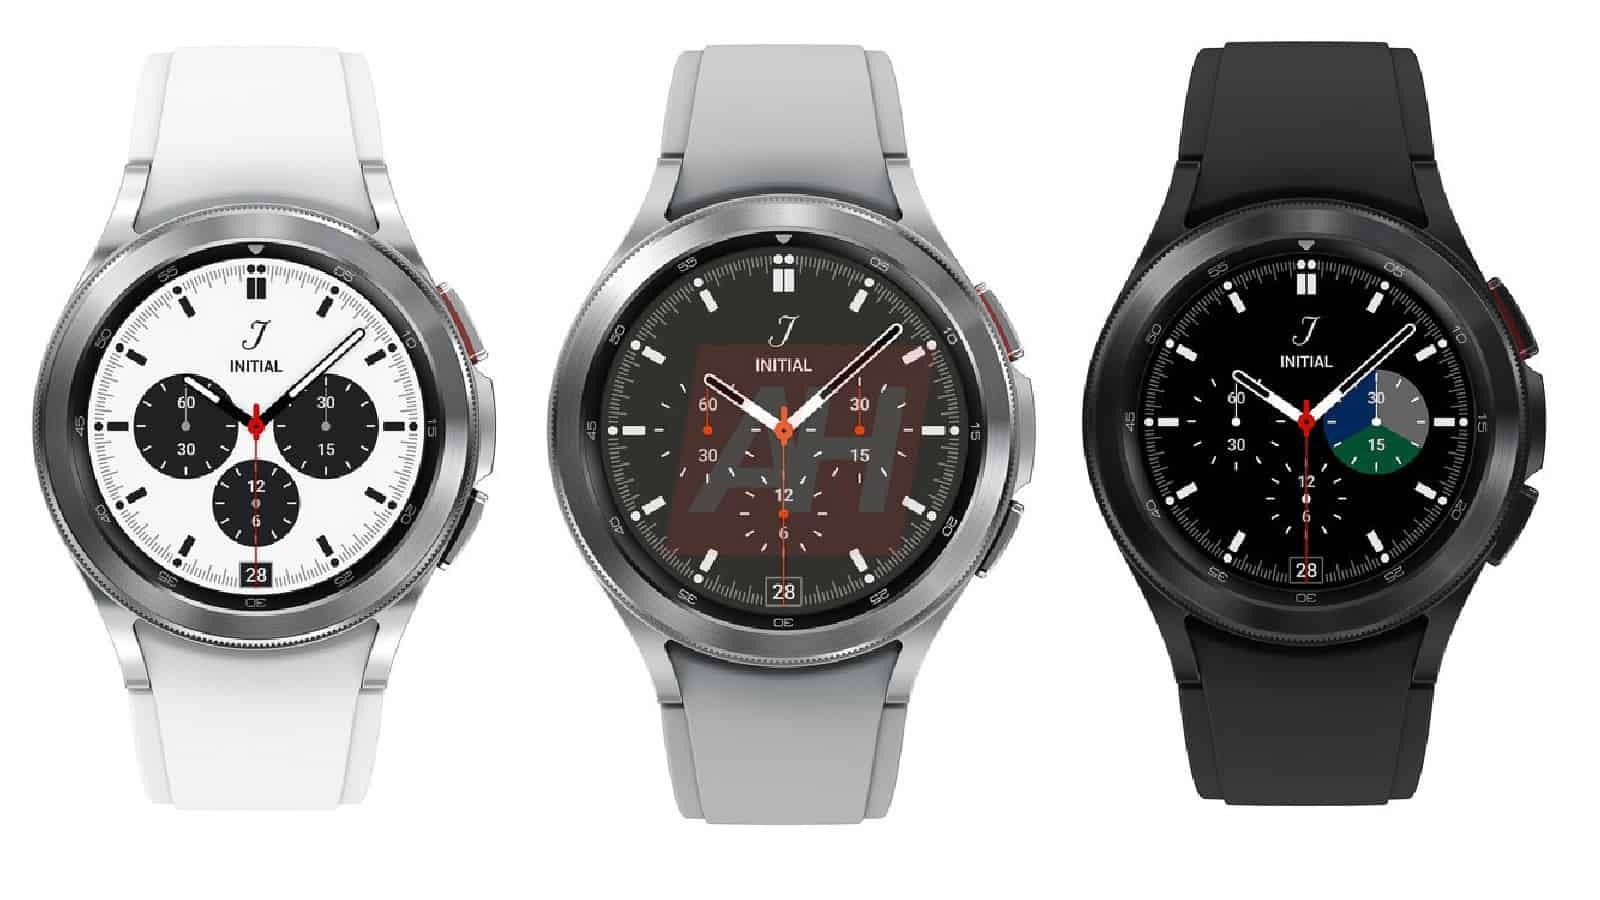 Samsung's premium Galaxy Watch 4 Classic has leaked and it looks fantastic